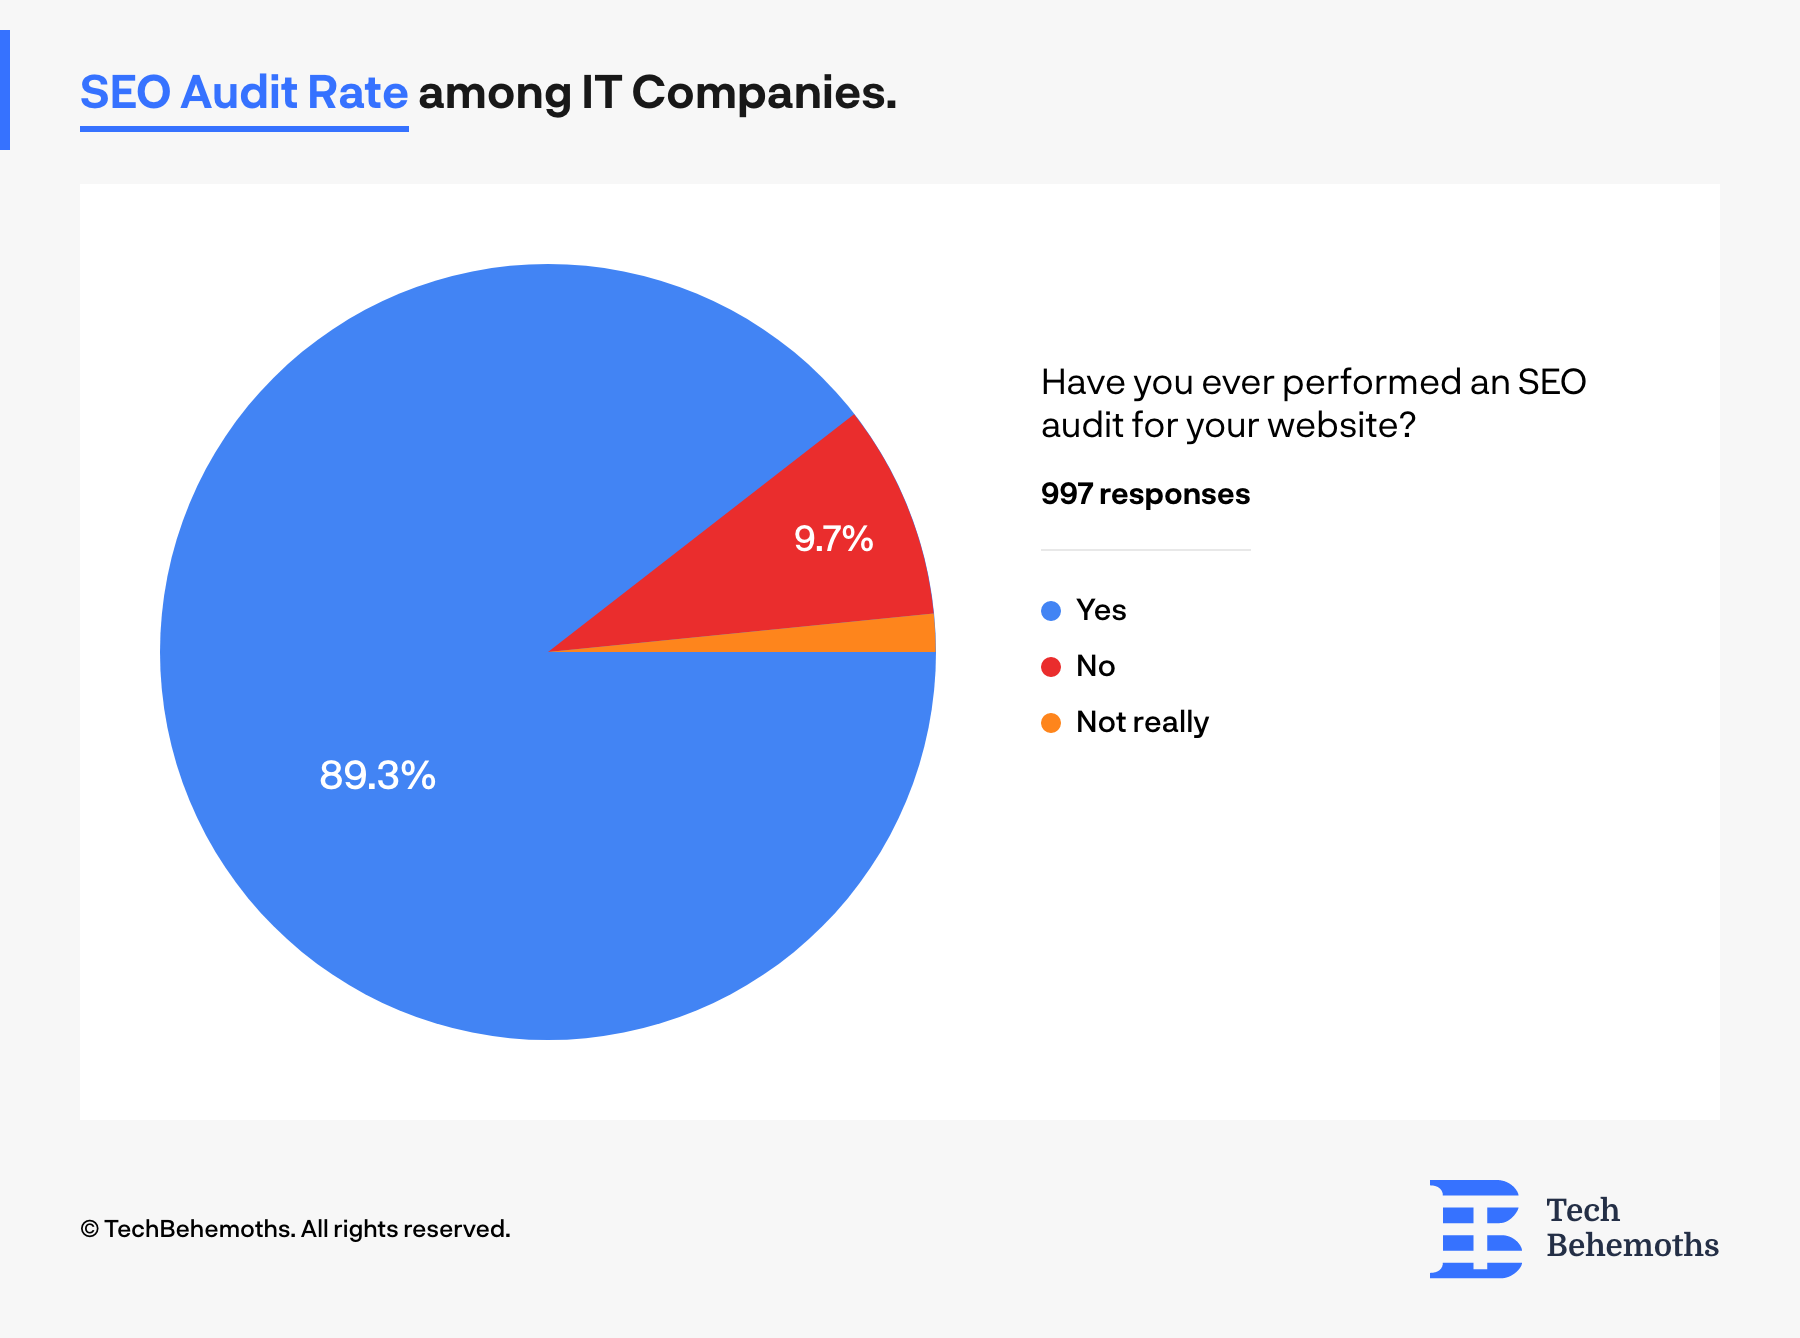 89.3% of all IT companies performed an SEO audit at least once